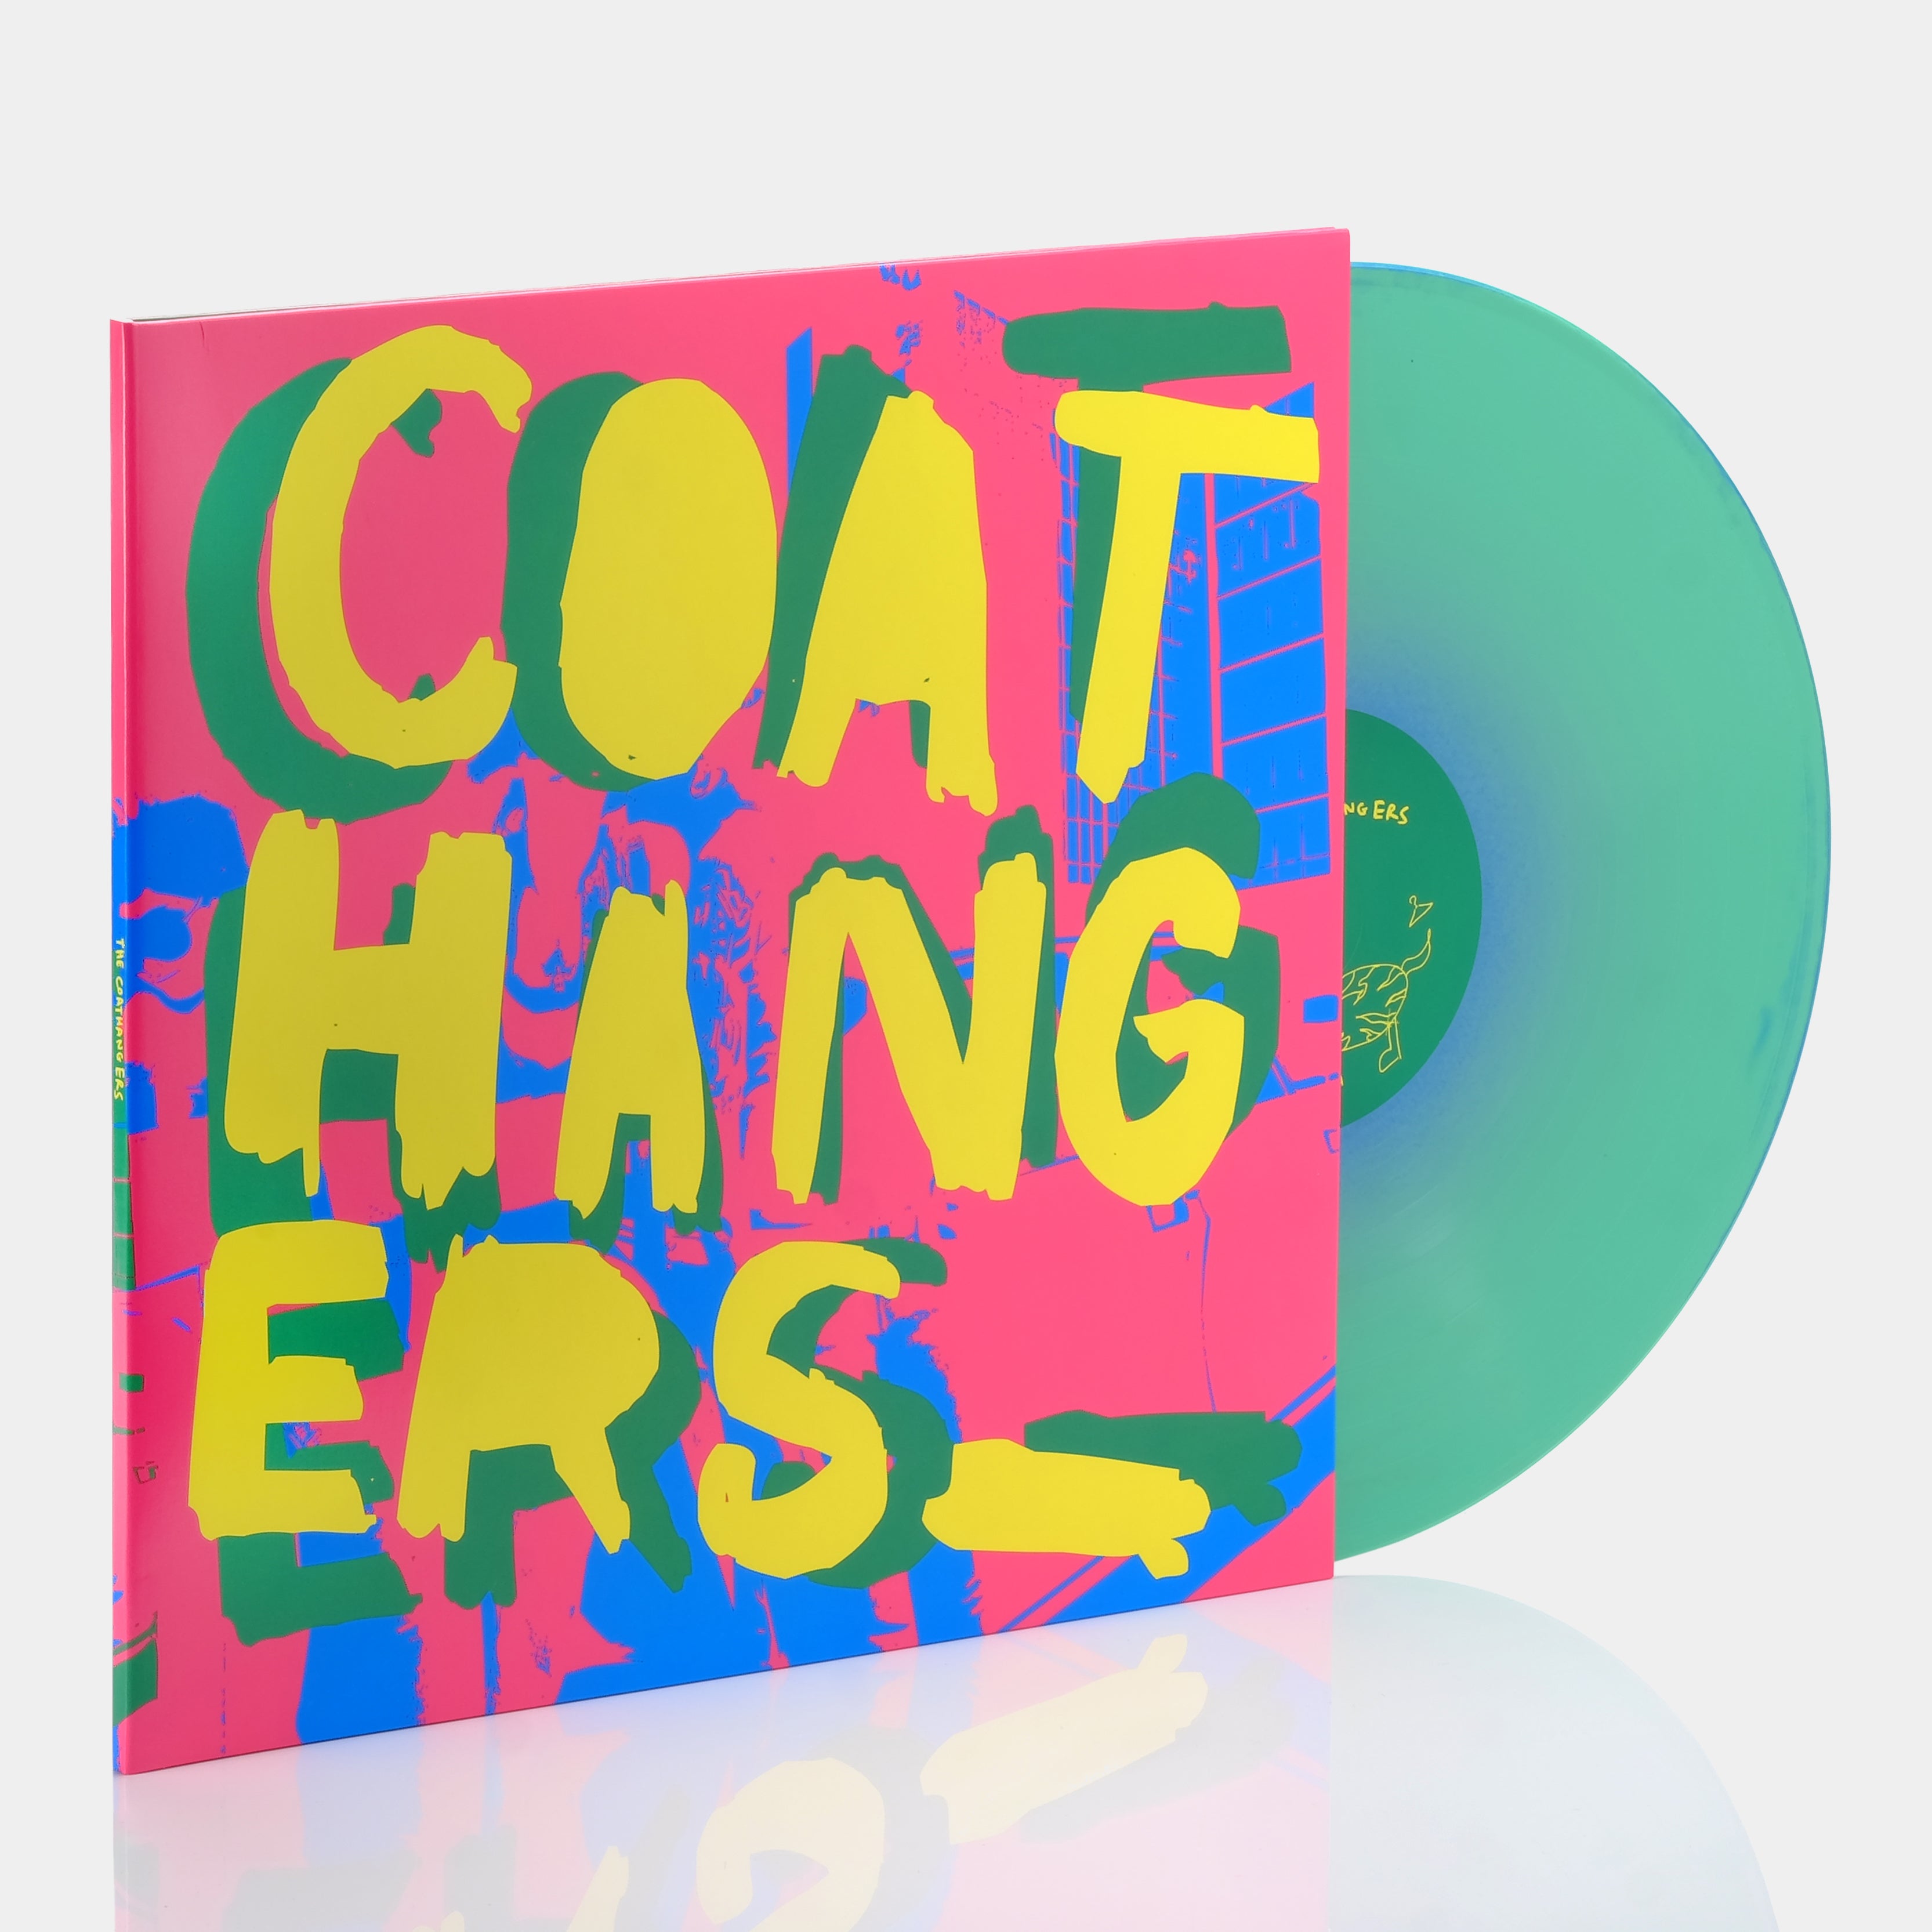 The Coathangers - The Coathangers LP Green & Blue Wreckless Vinyl Record